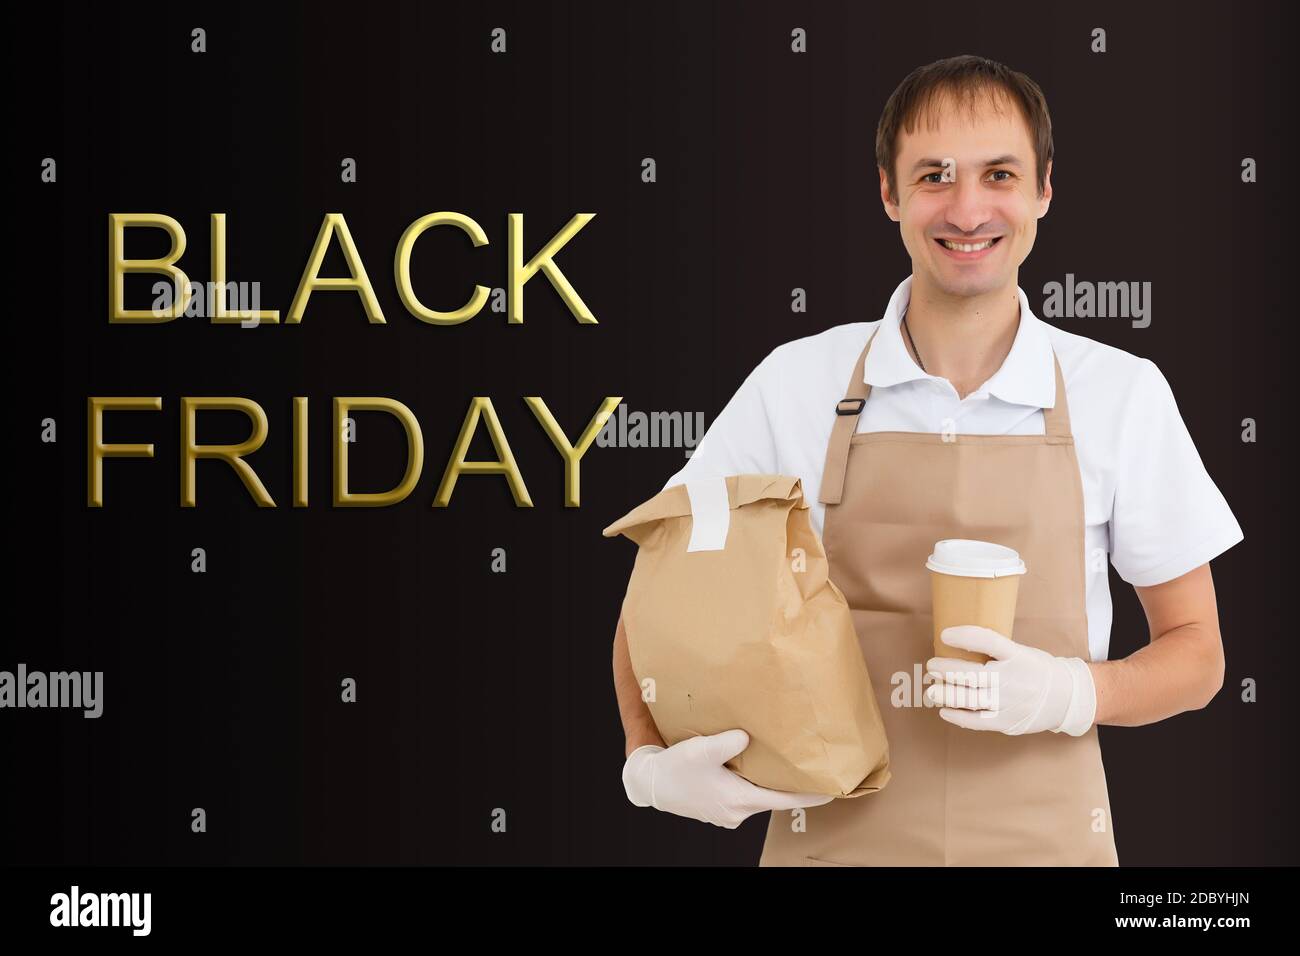 black friday and the delivery man. Delivery concept. Delivery service concept. Copy space. Black friday concept. Stock Photo